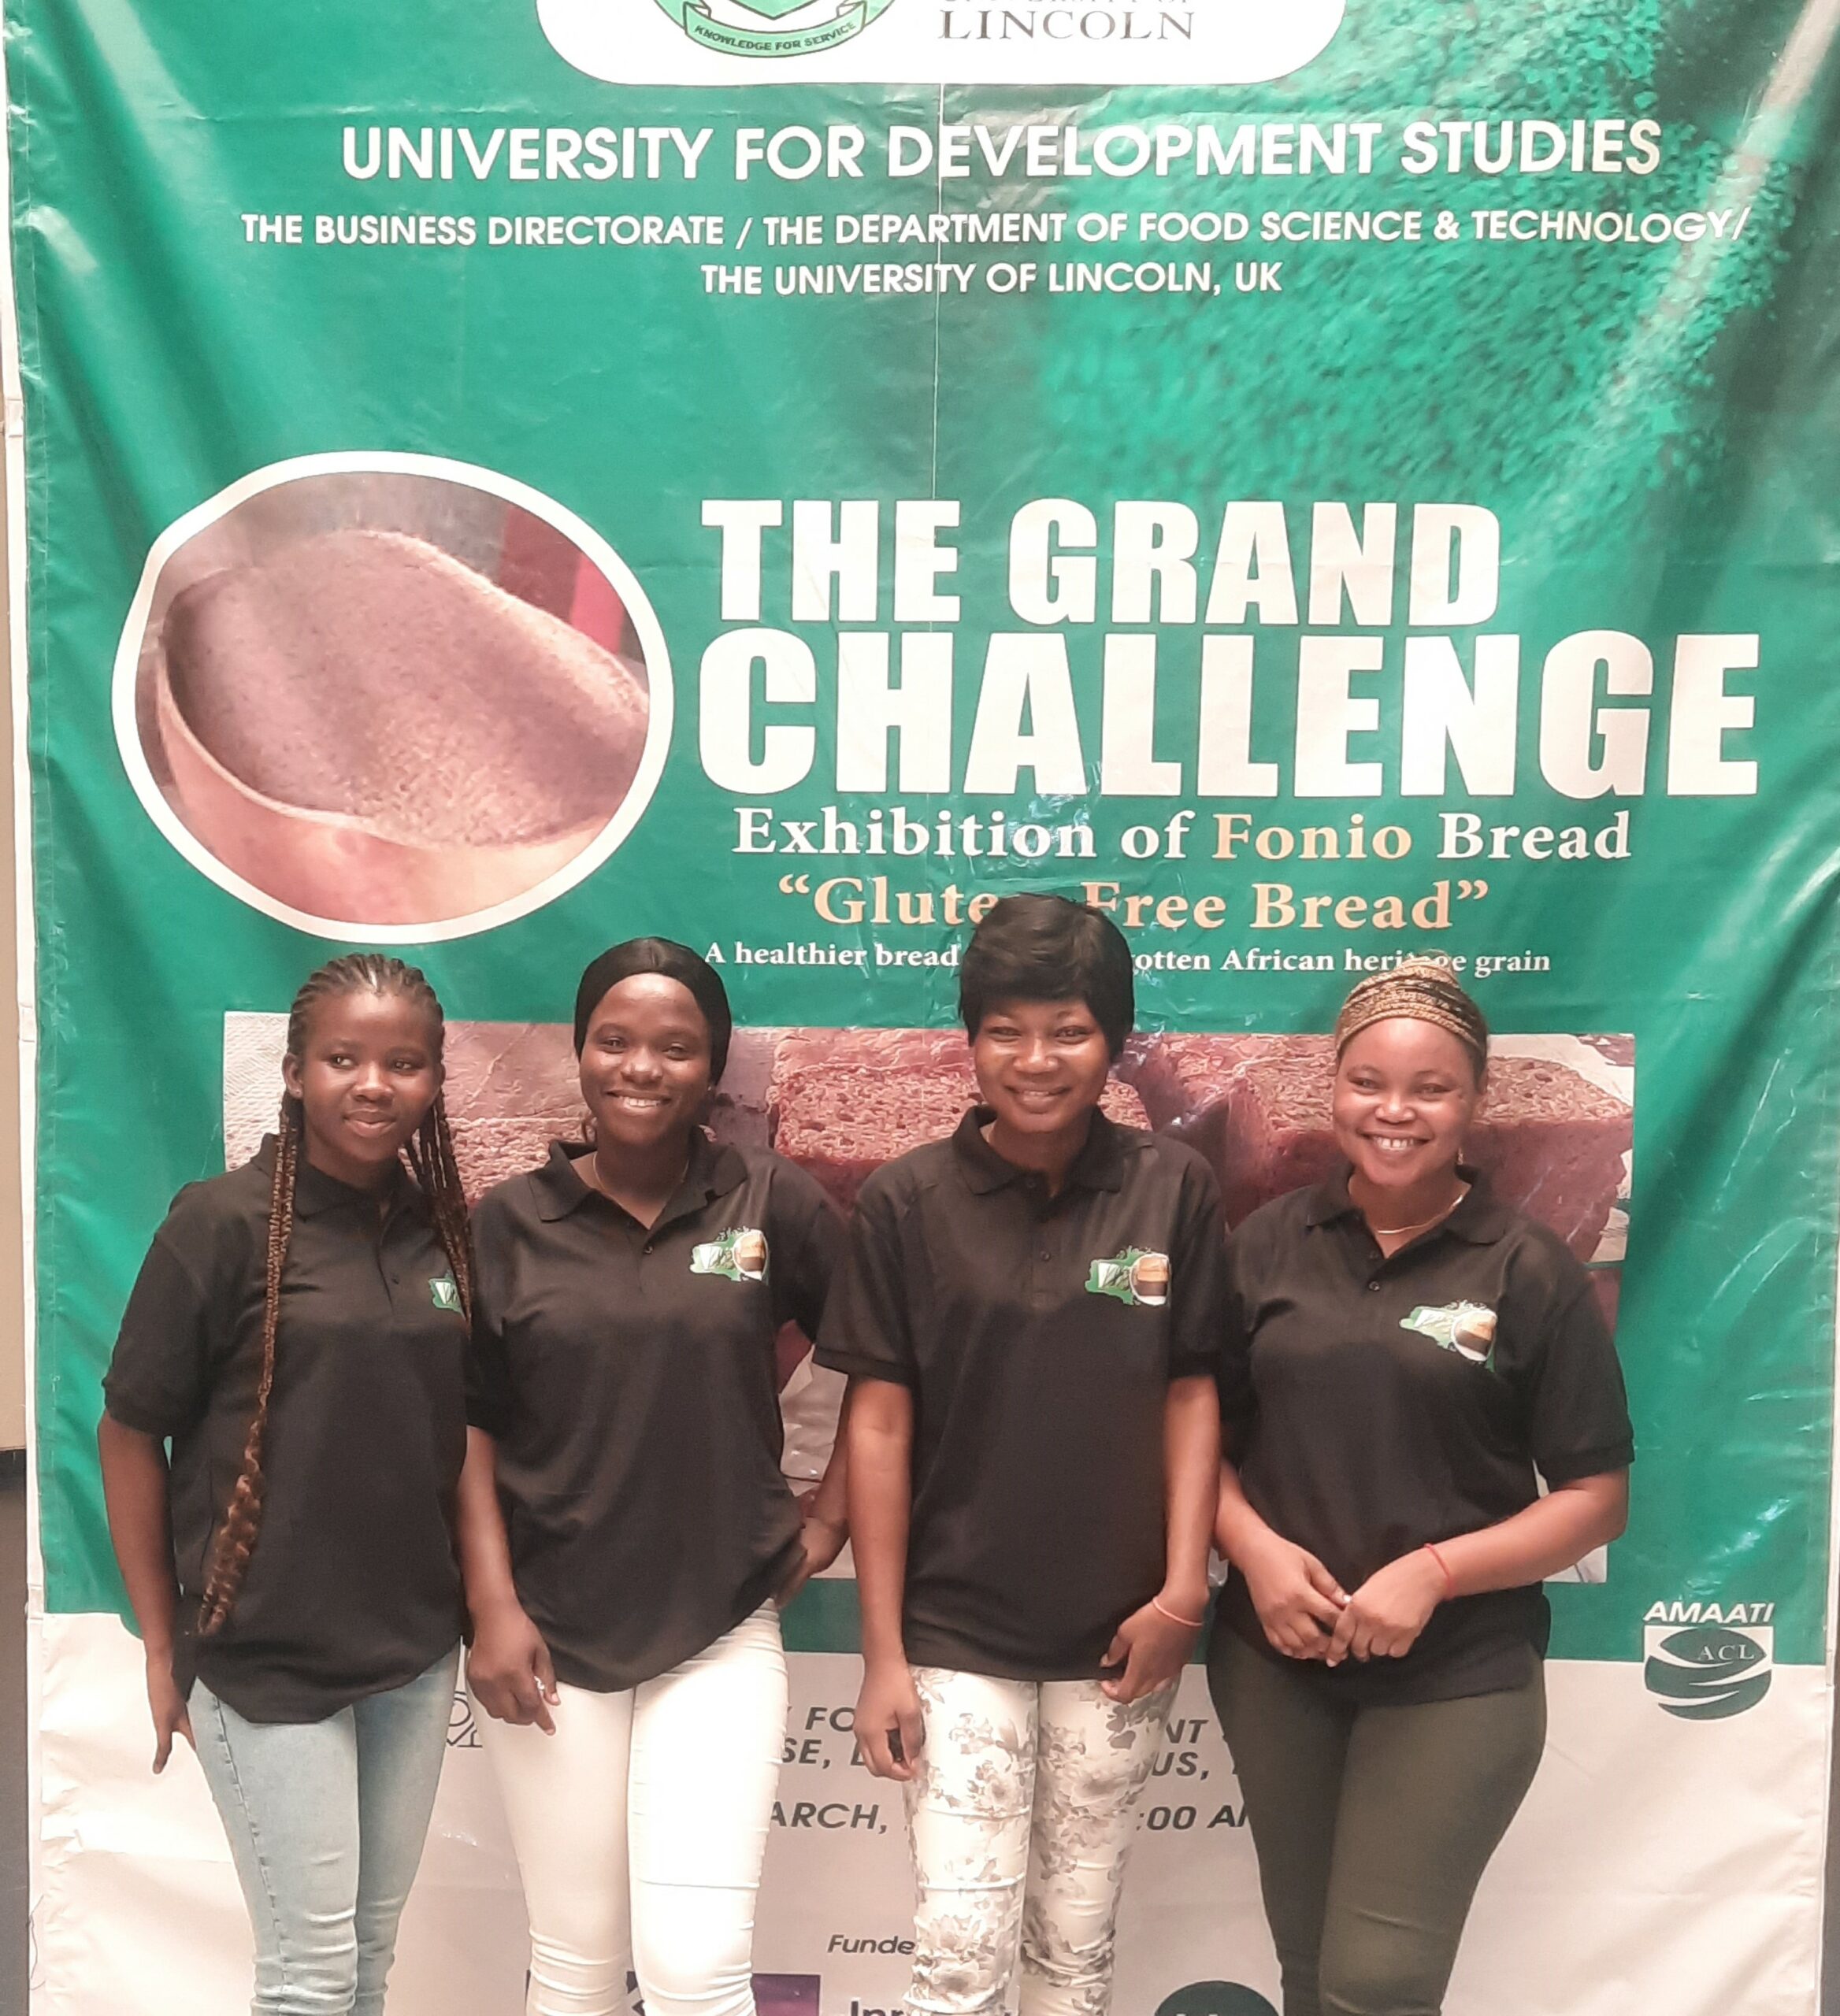 UDS students win grant to produce bread using Fonio